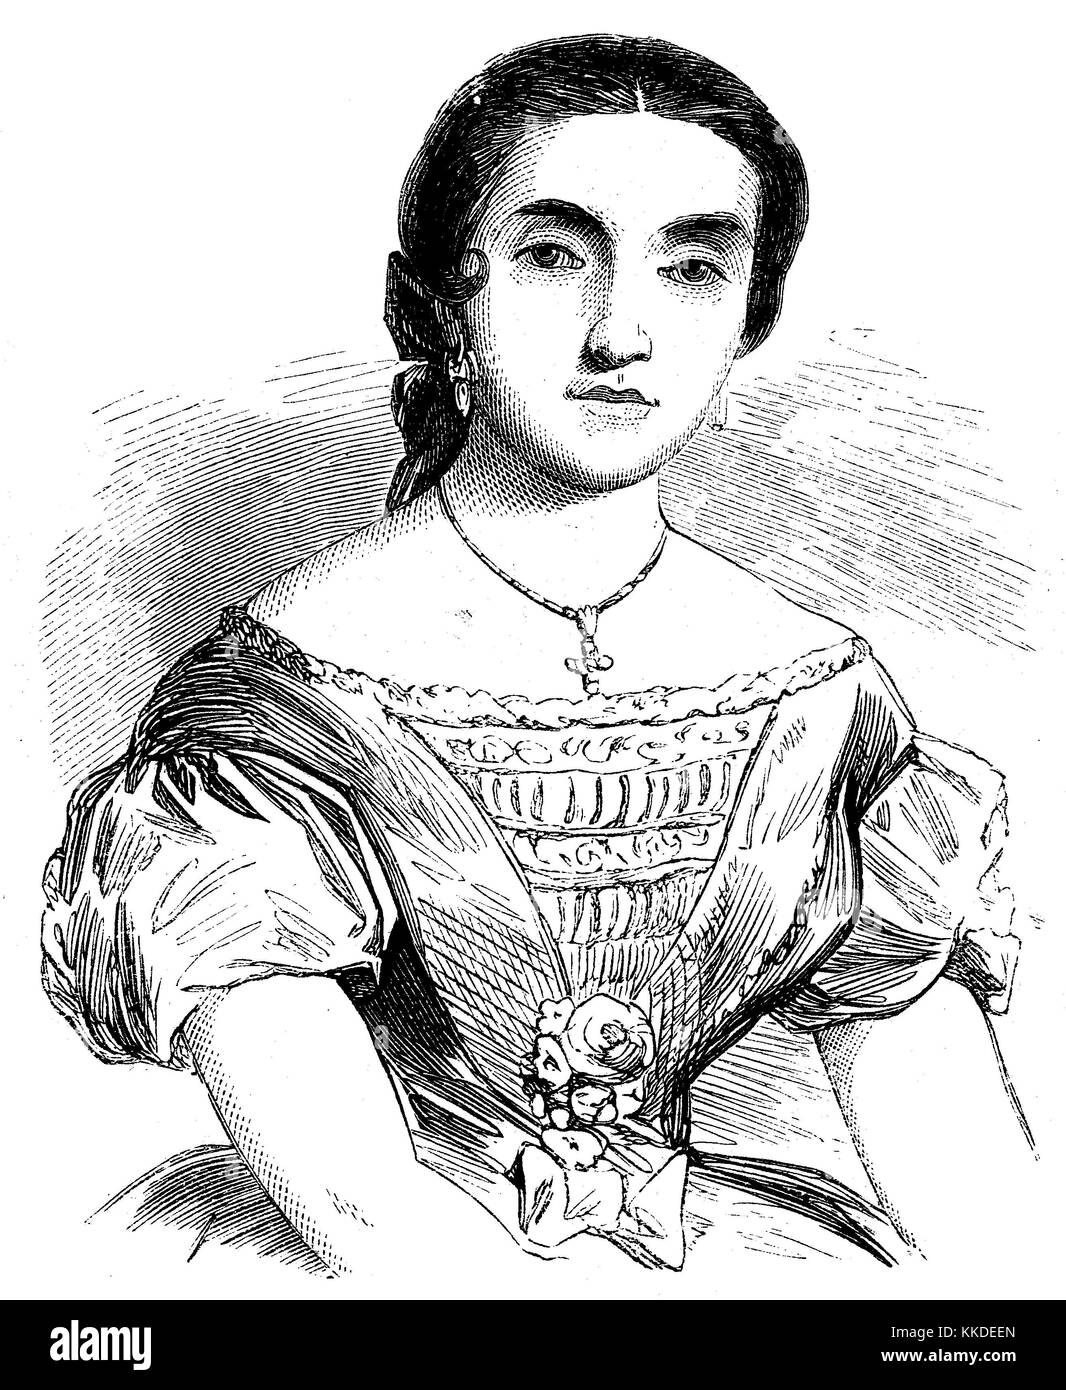 Adelaide Borghi-Mamo, 9 August 1826 - 29 September 1901, was an Italian operatic mezzo-soprano, pictures of the time of 1855, Digital improved reproduction of an original woodcut Stock Photo